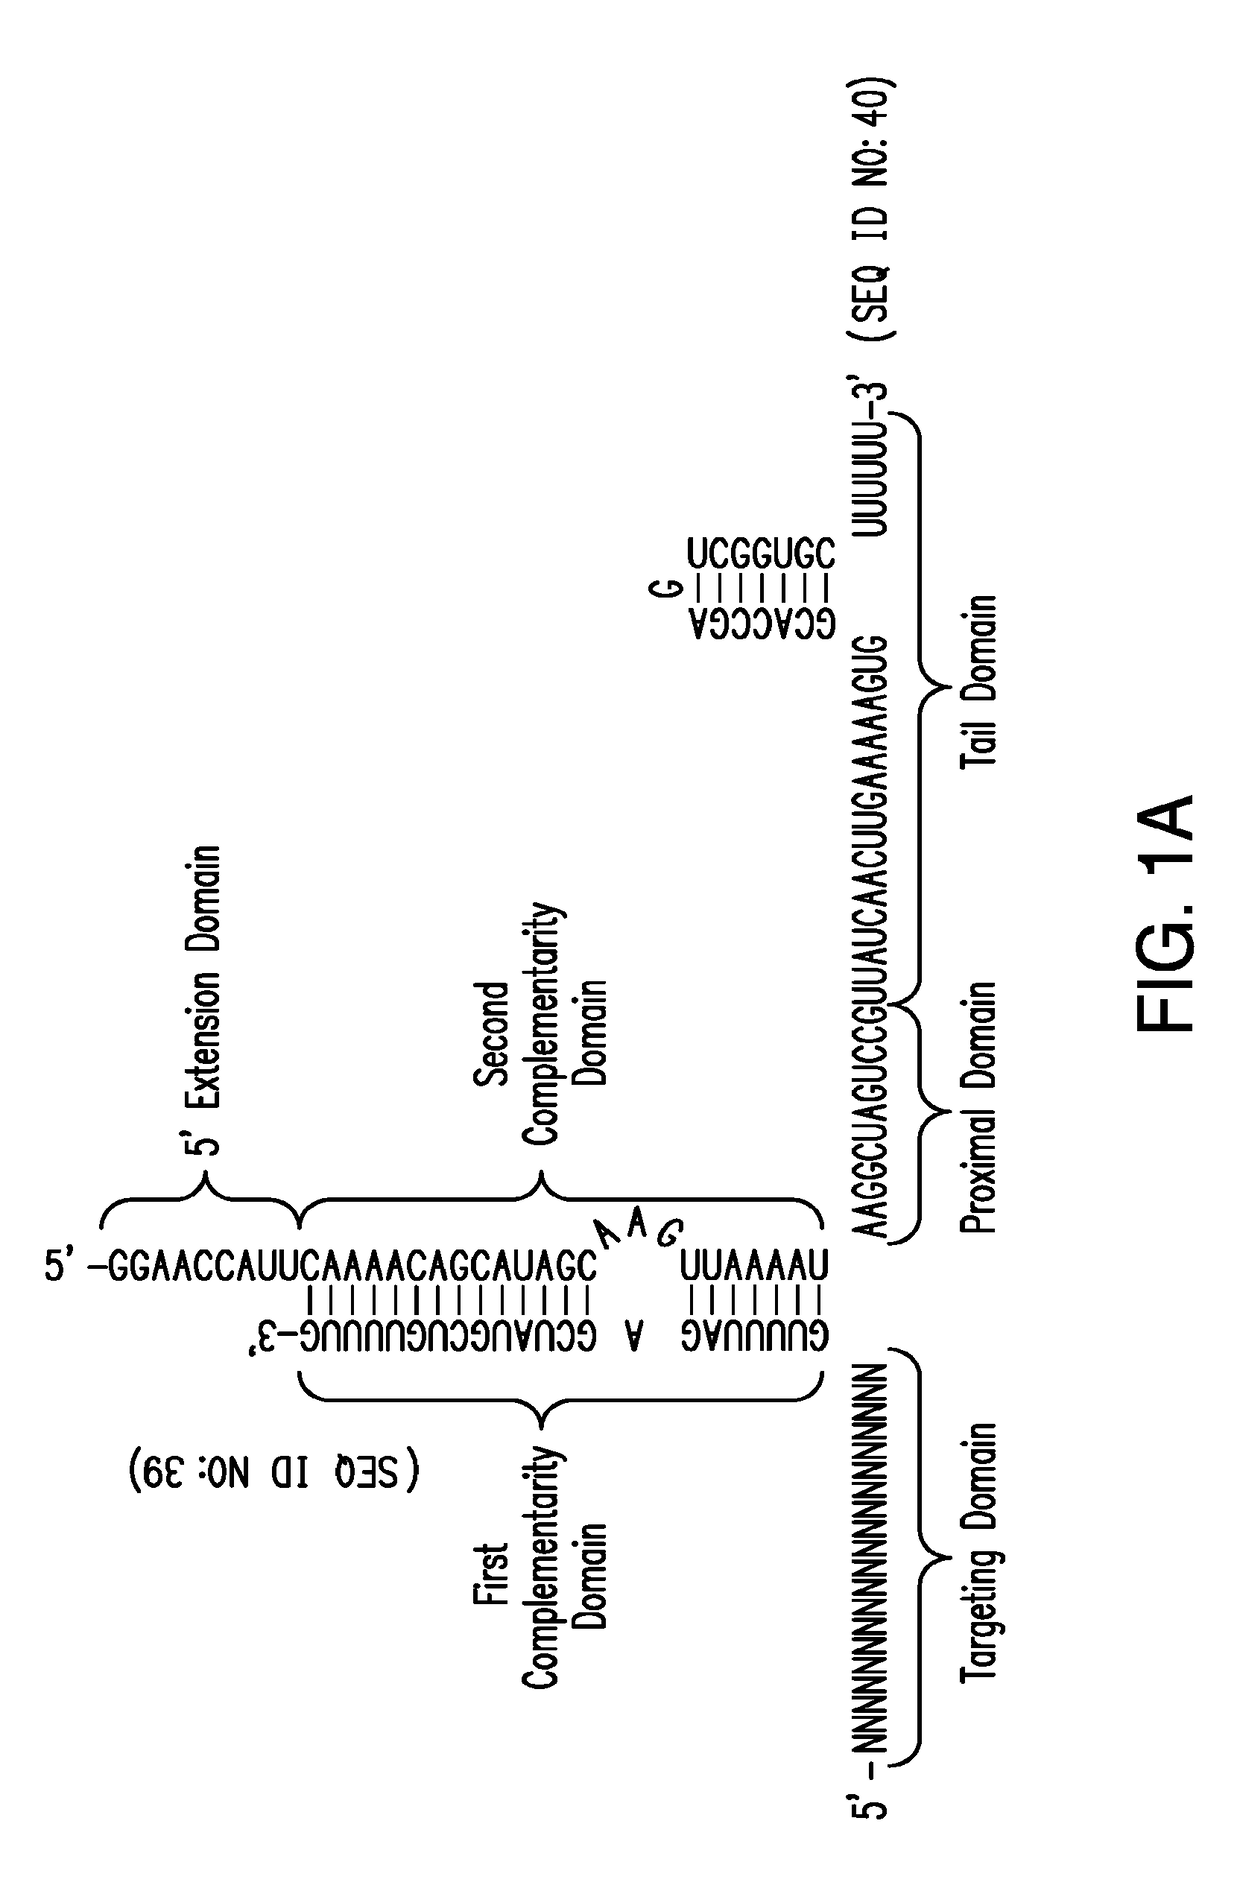 Crispr/cas-related methods and compositions for treating hepatitis b virus